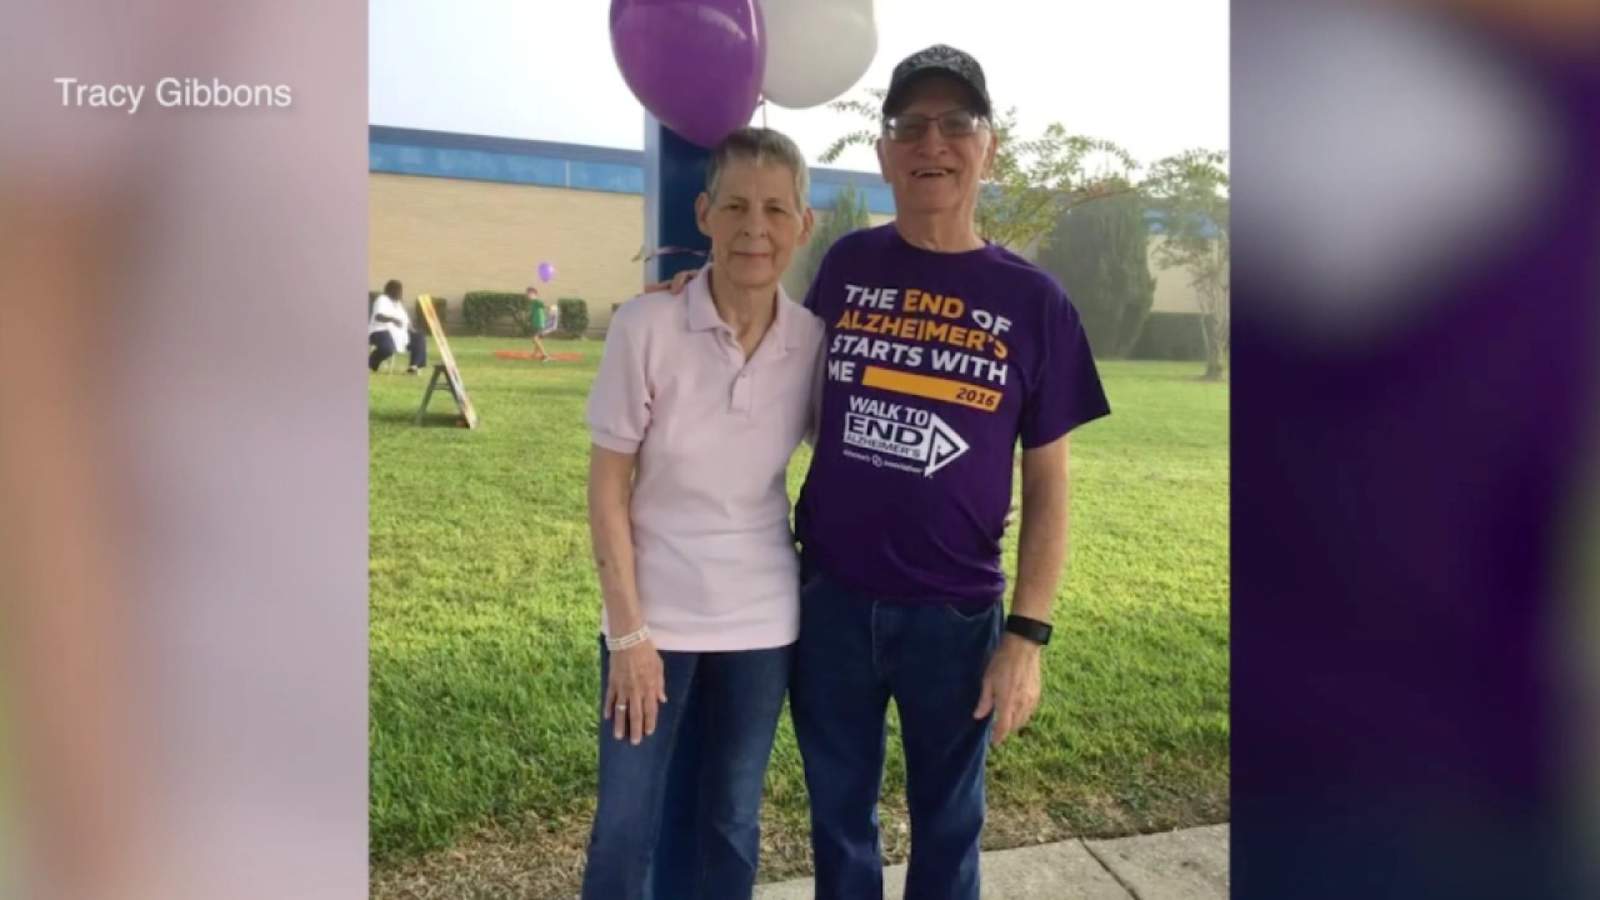 Walk to End Alzheimer’s to take place virtually on Saturday